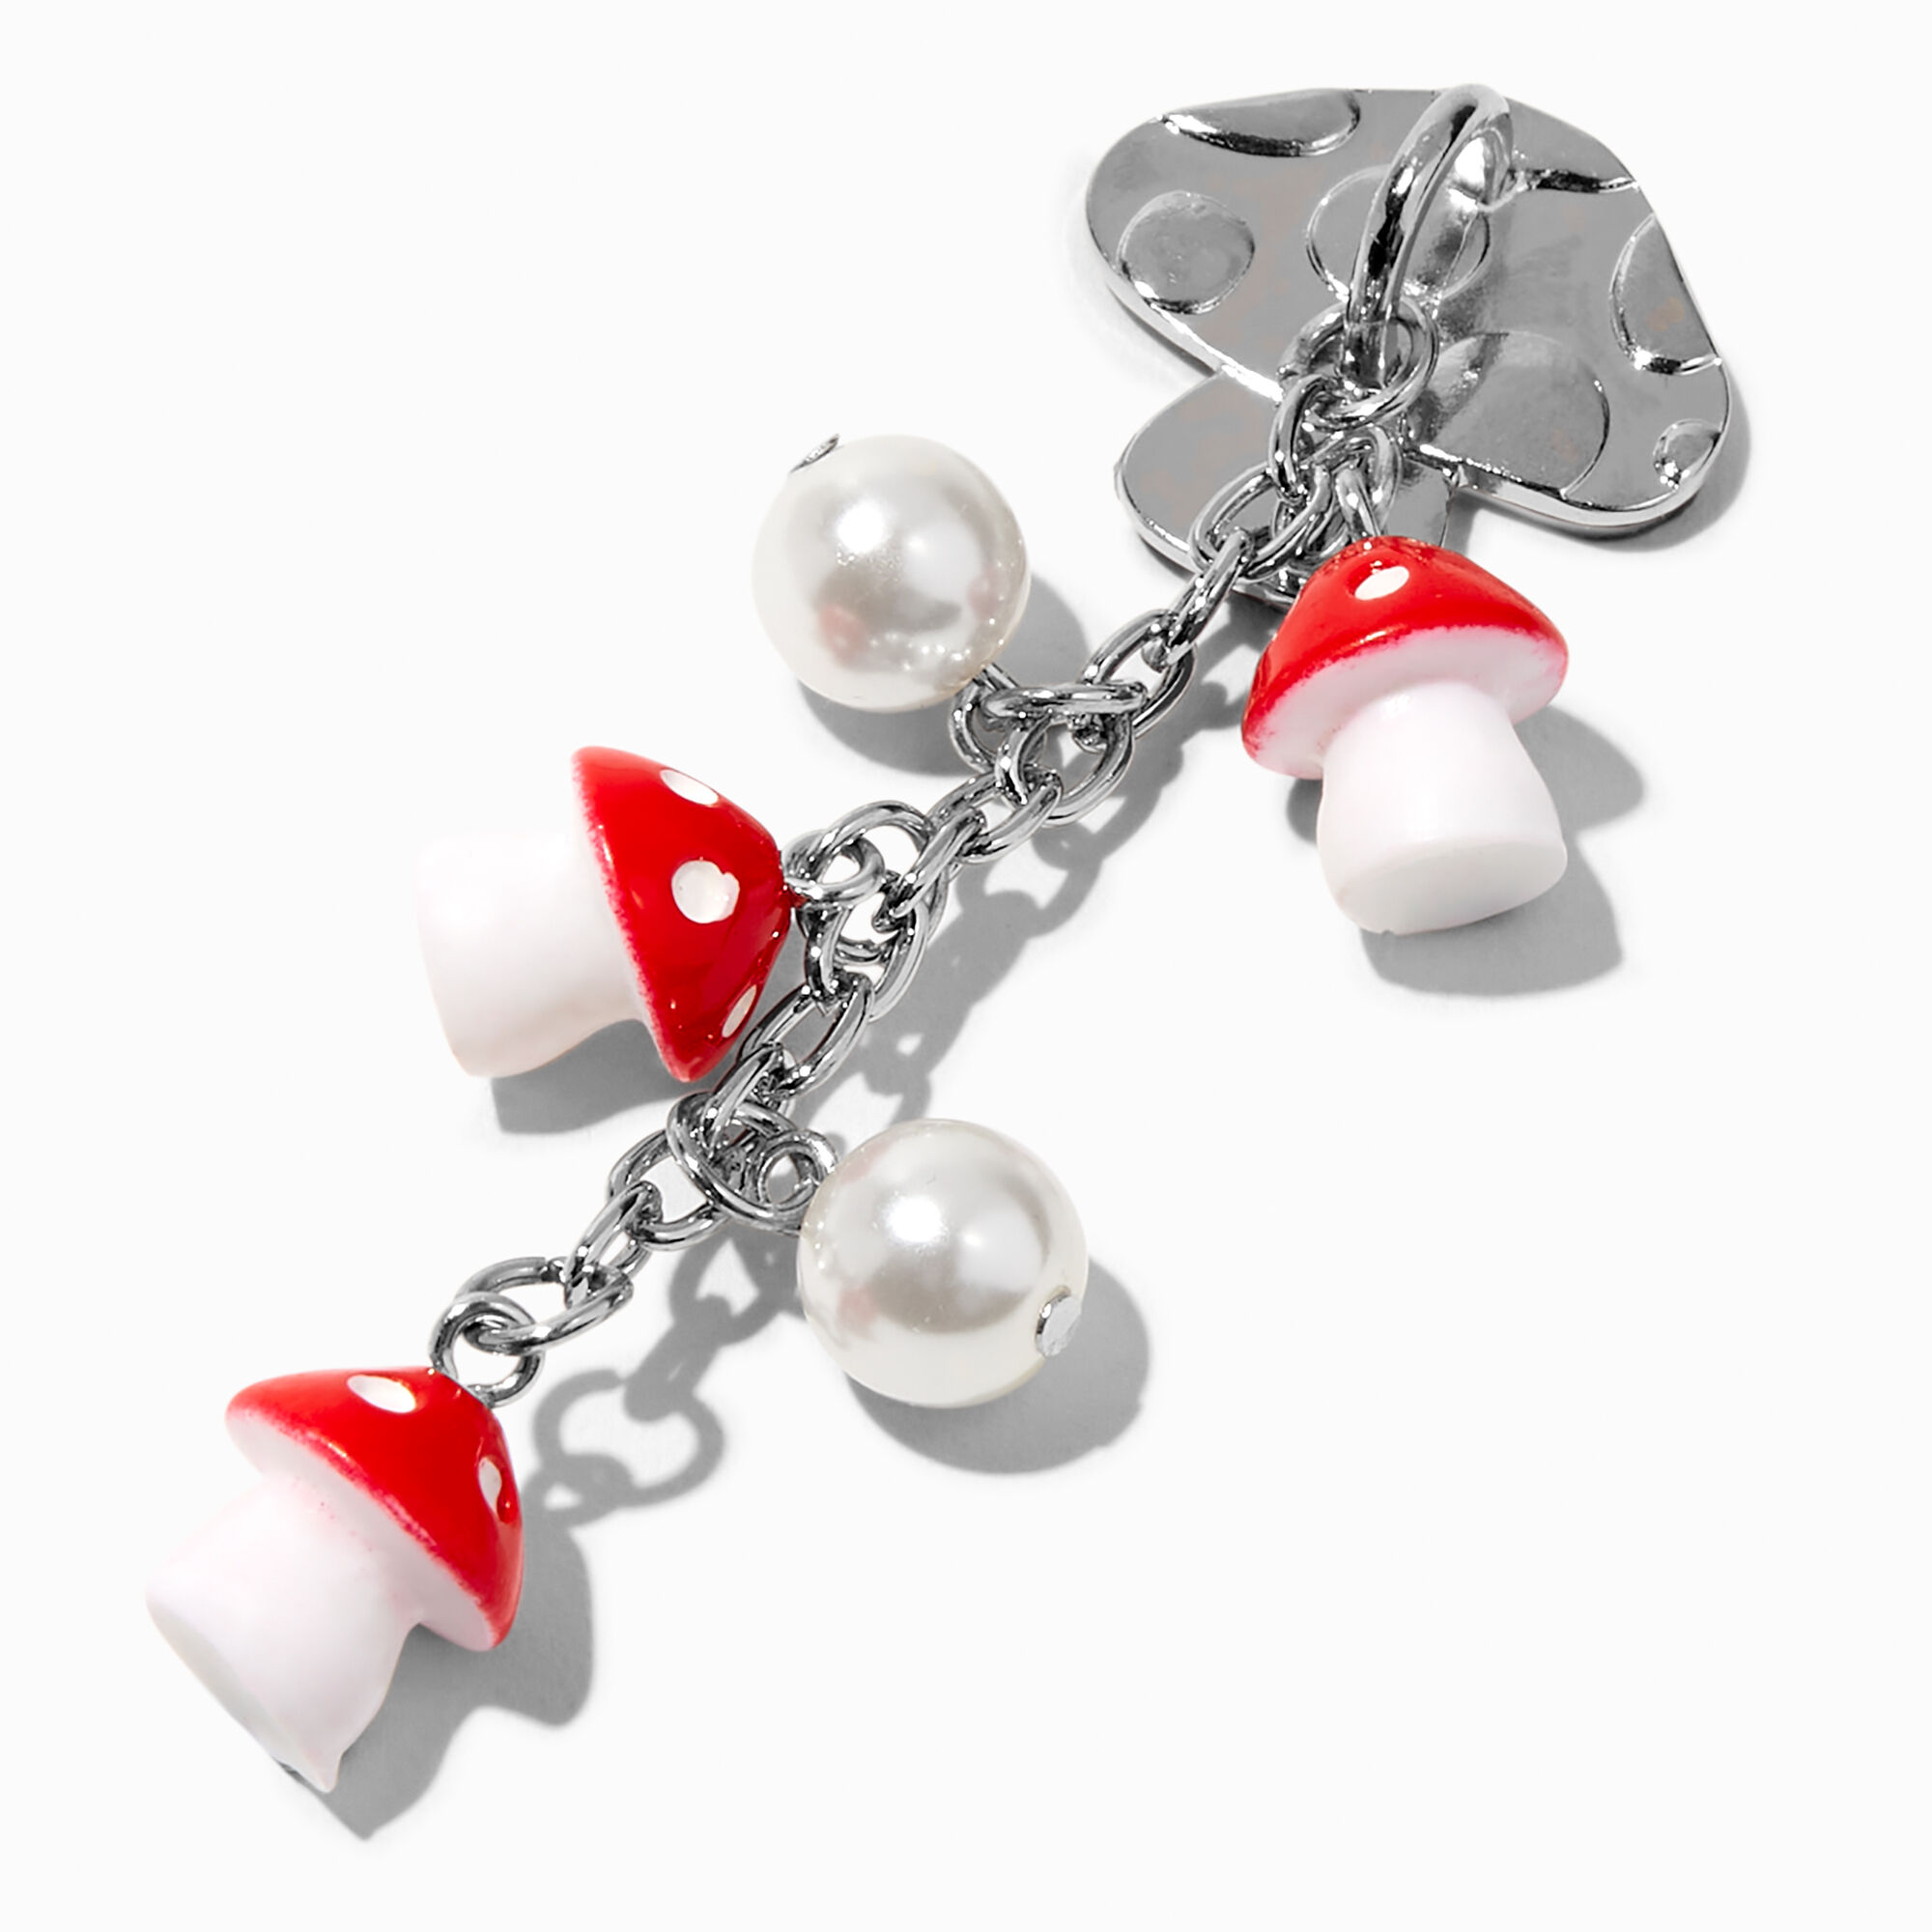 View Claires Mushroom Chain Ring Stand Red information